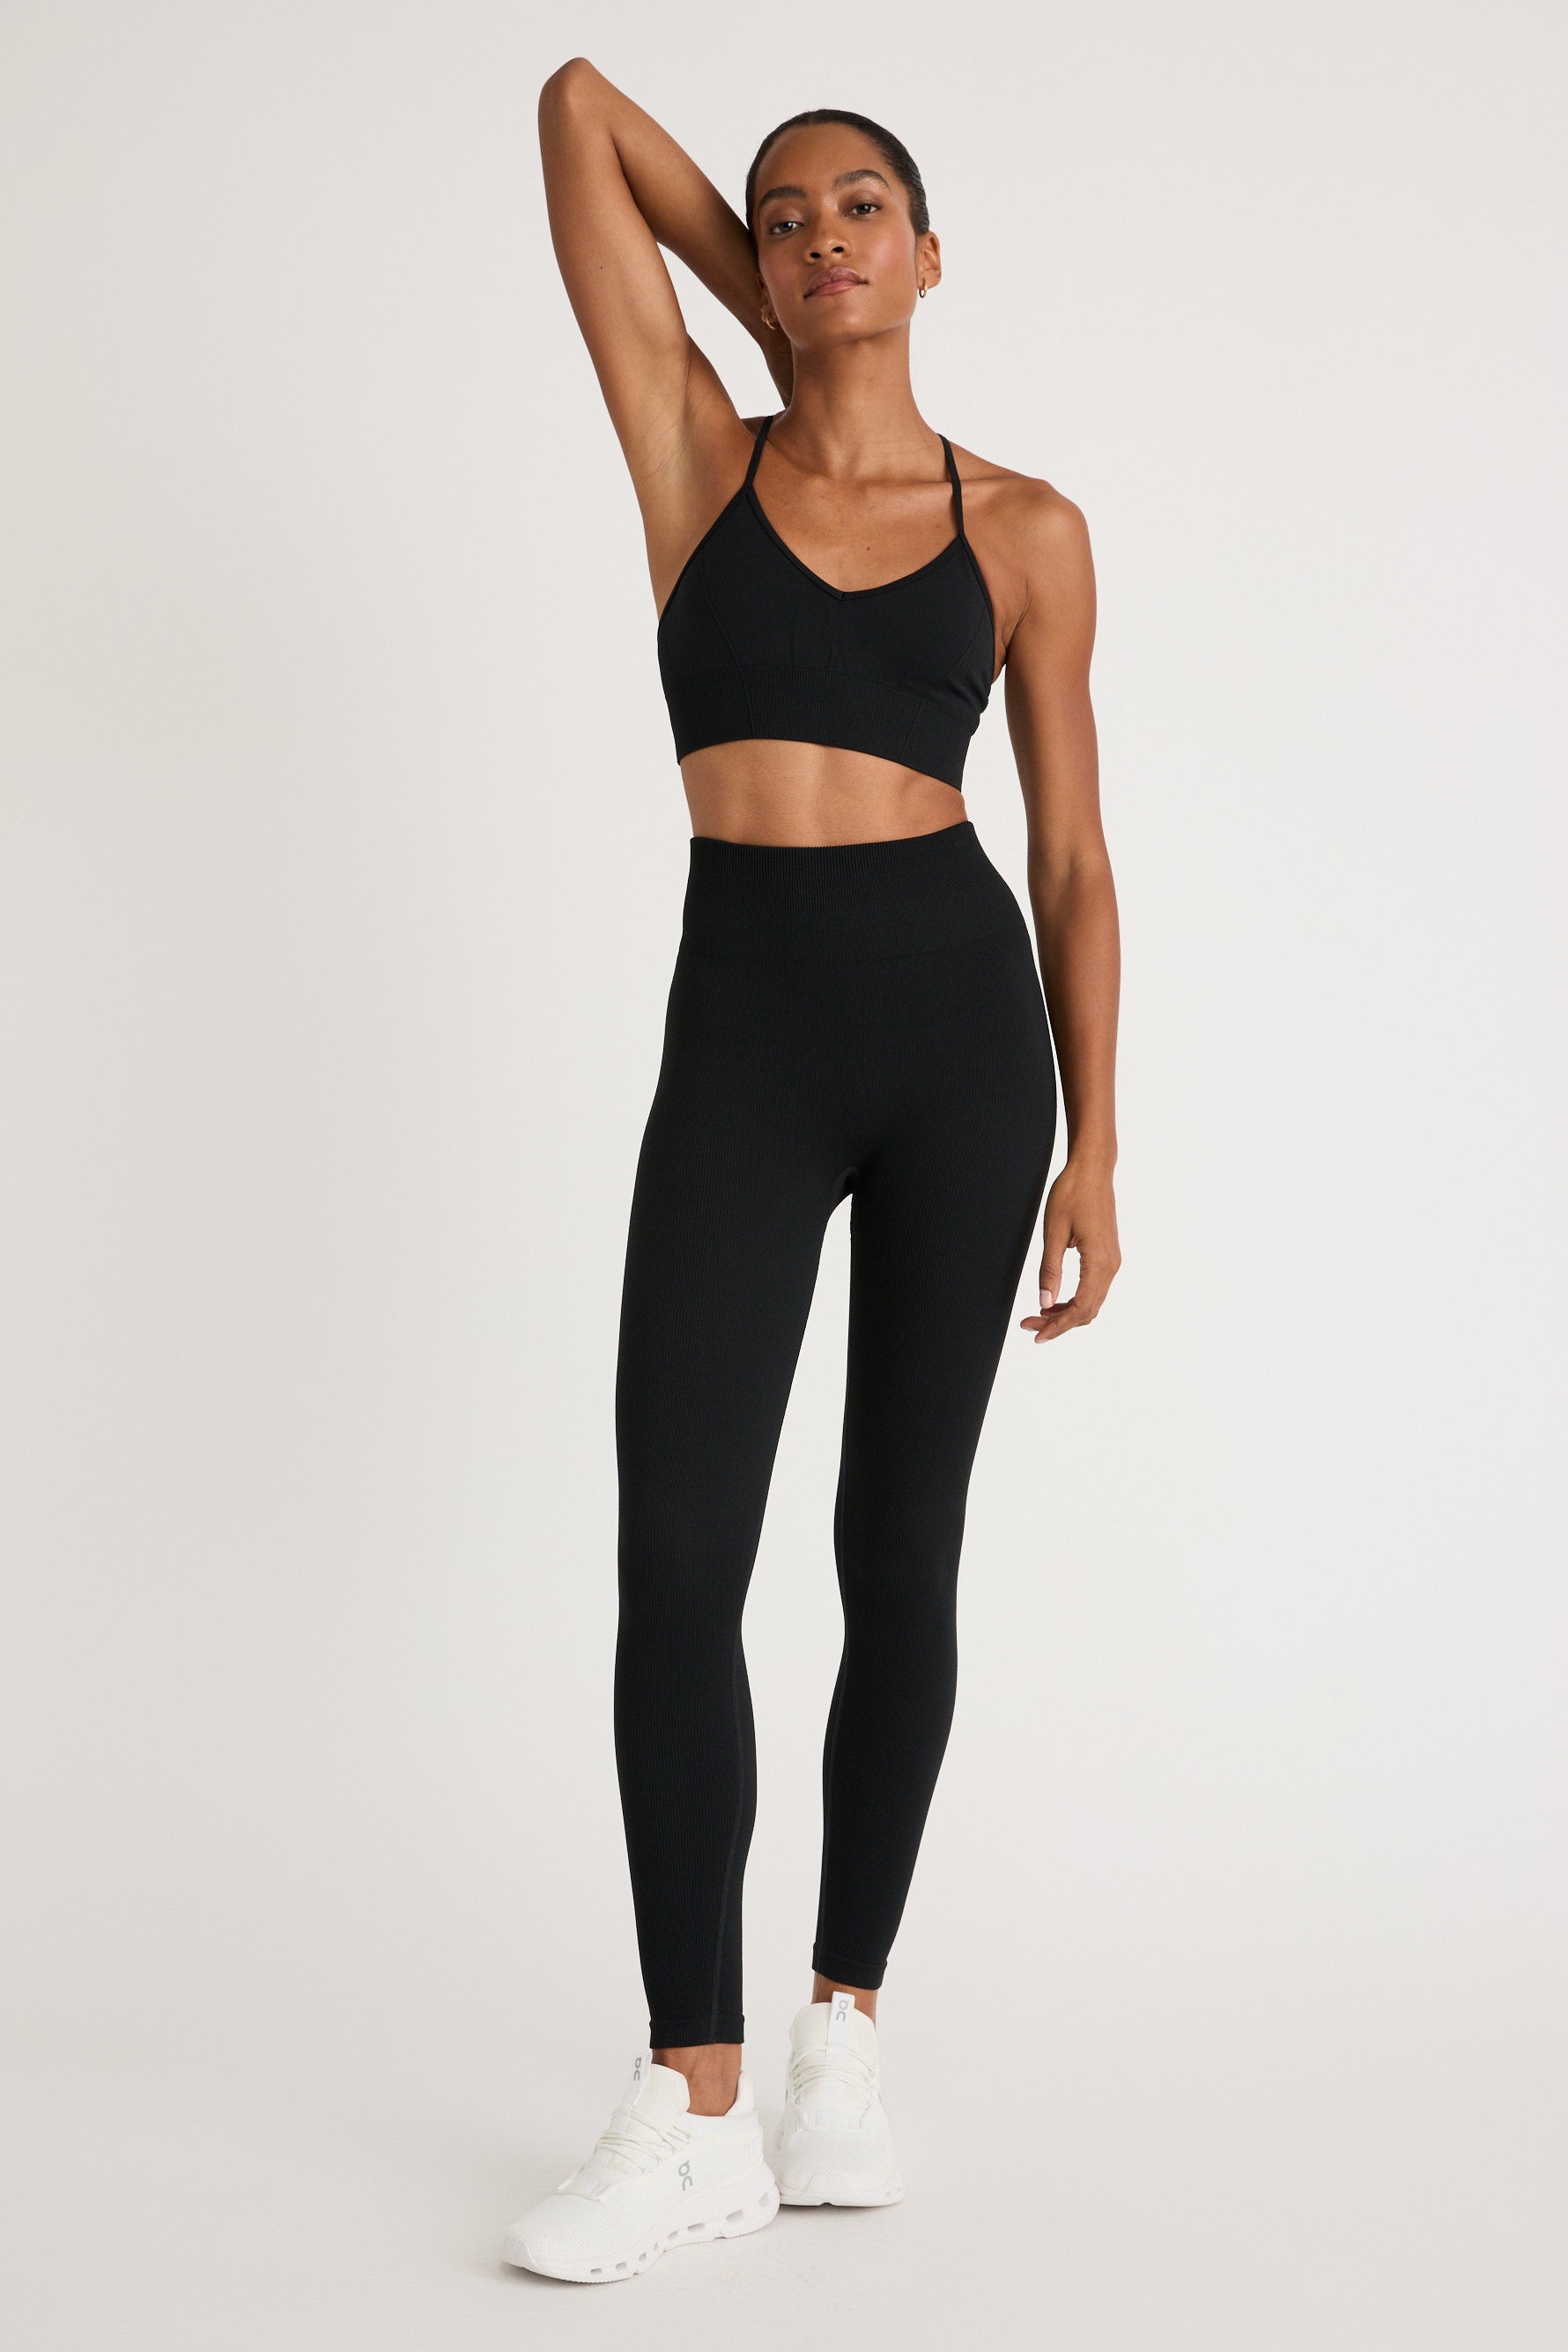 Set Active Seamless Workout Gym Leggings High Rise size extra small / small  - $30 - From Jillianne